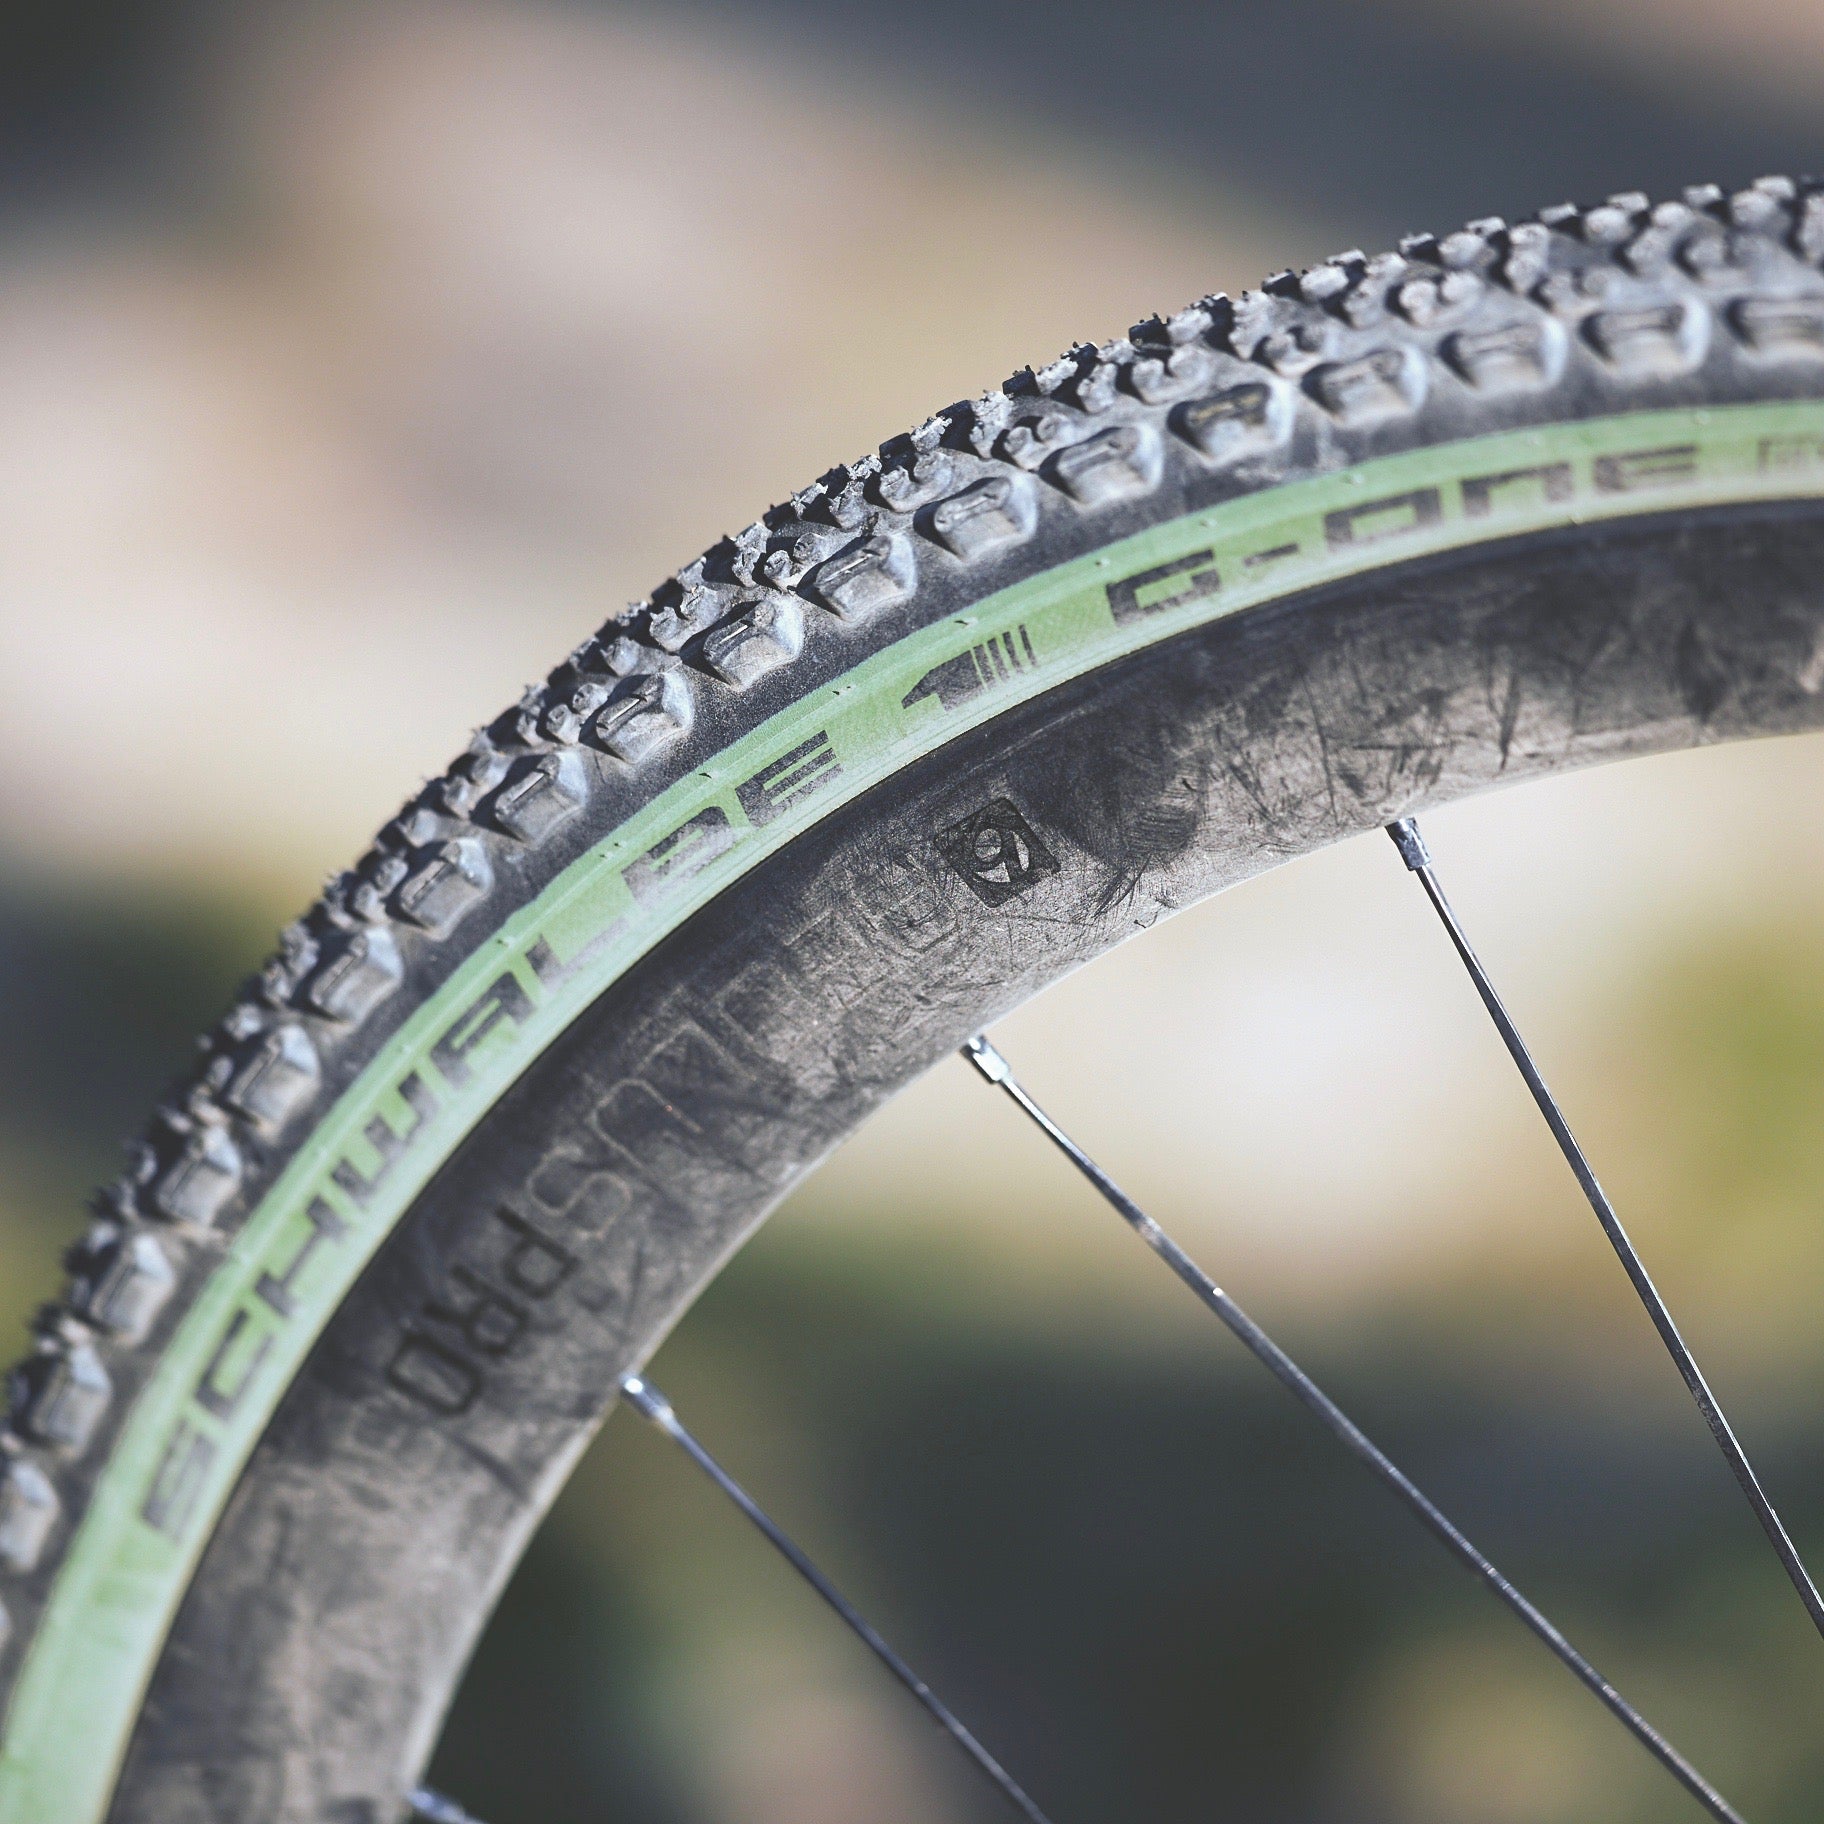 SCHWALBE G-One Ultrabite Special Edition Olive Skin